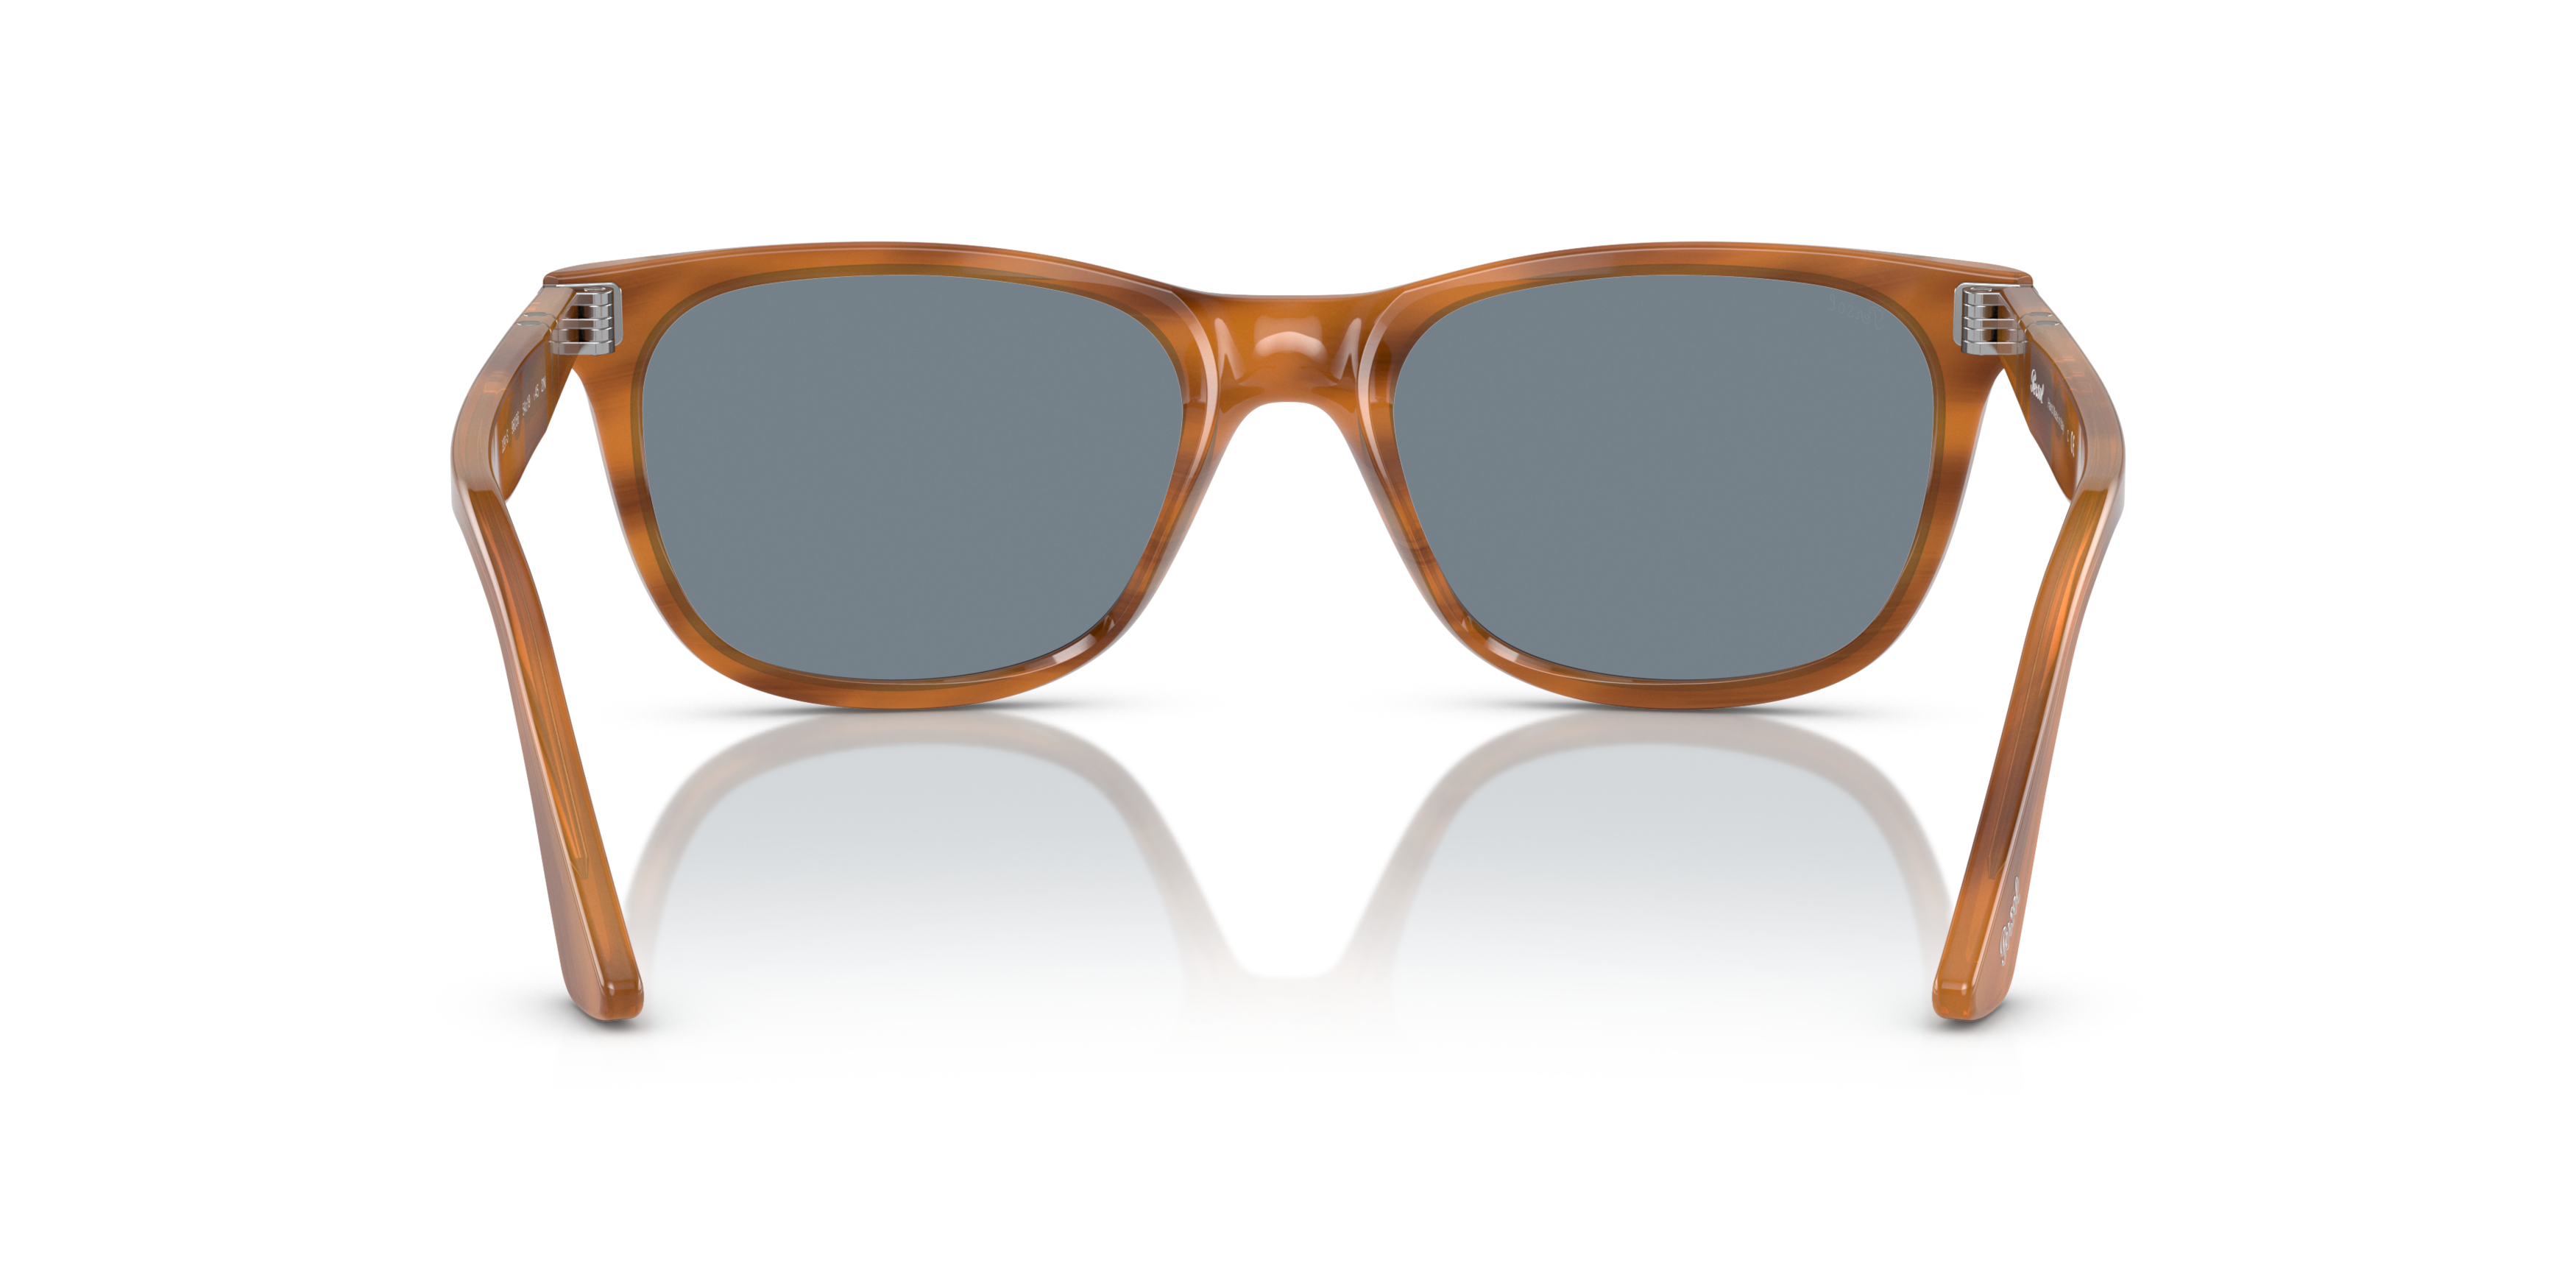 [products.image.detail02] Persol 0PO3291S 960/56 Solbriller